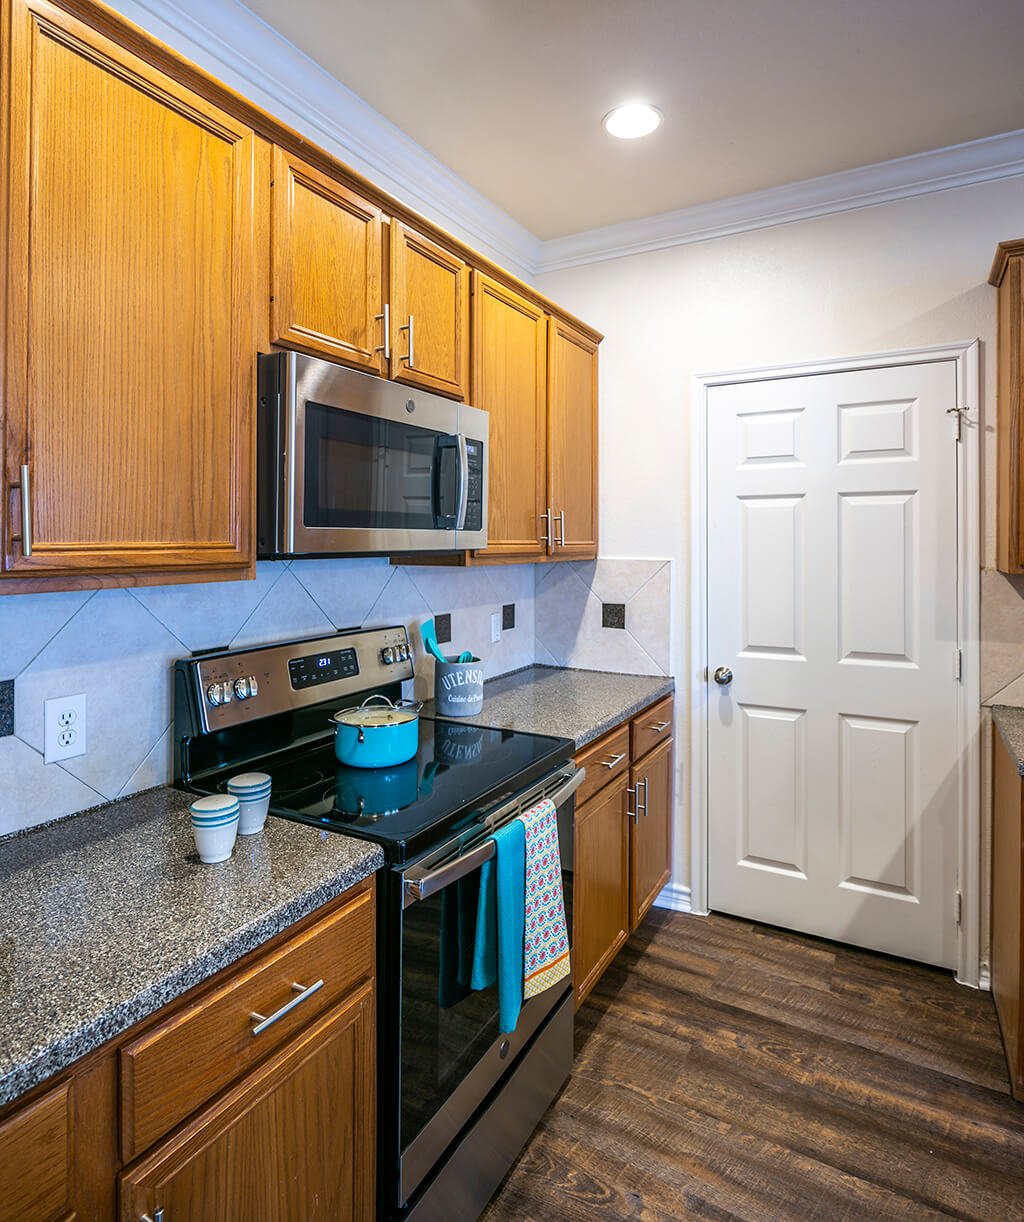 A kitchen with a double sink and stainless-steel appliances at The Dominion Apartments in Conroe, Texas.